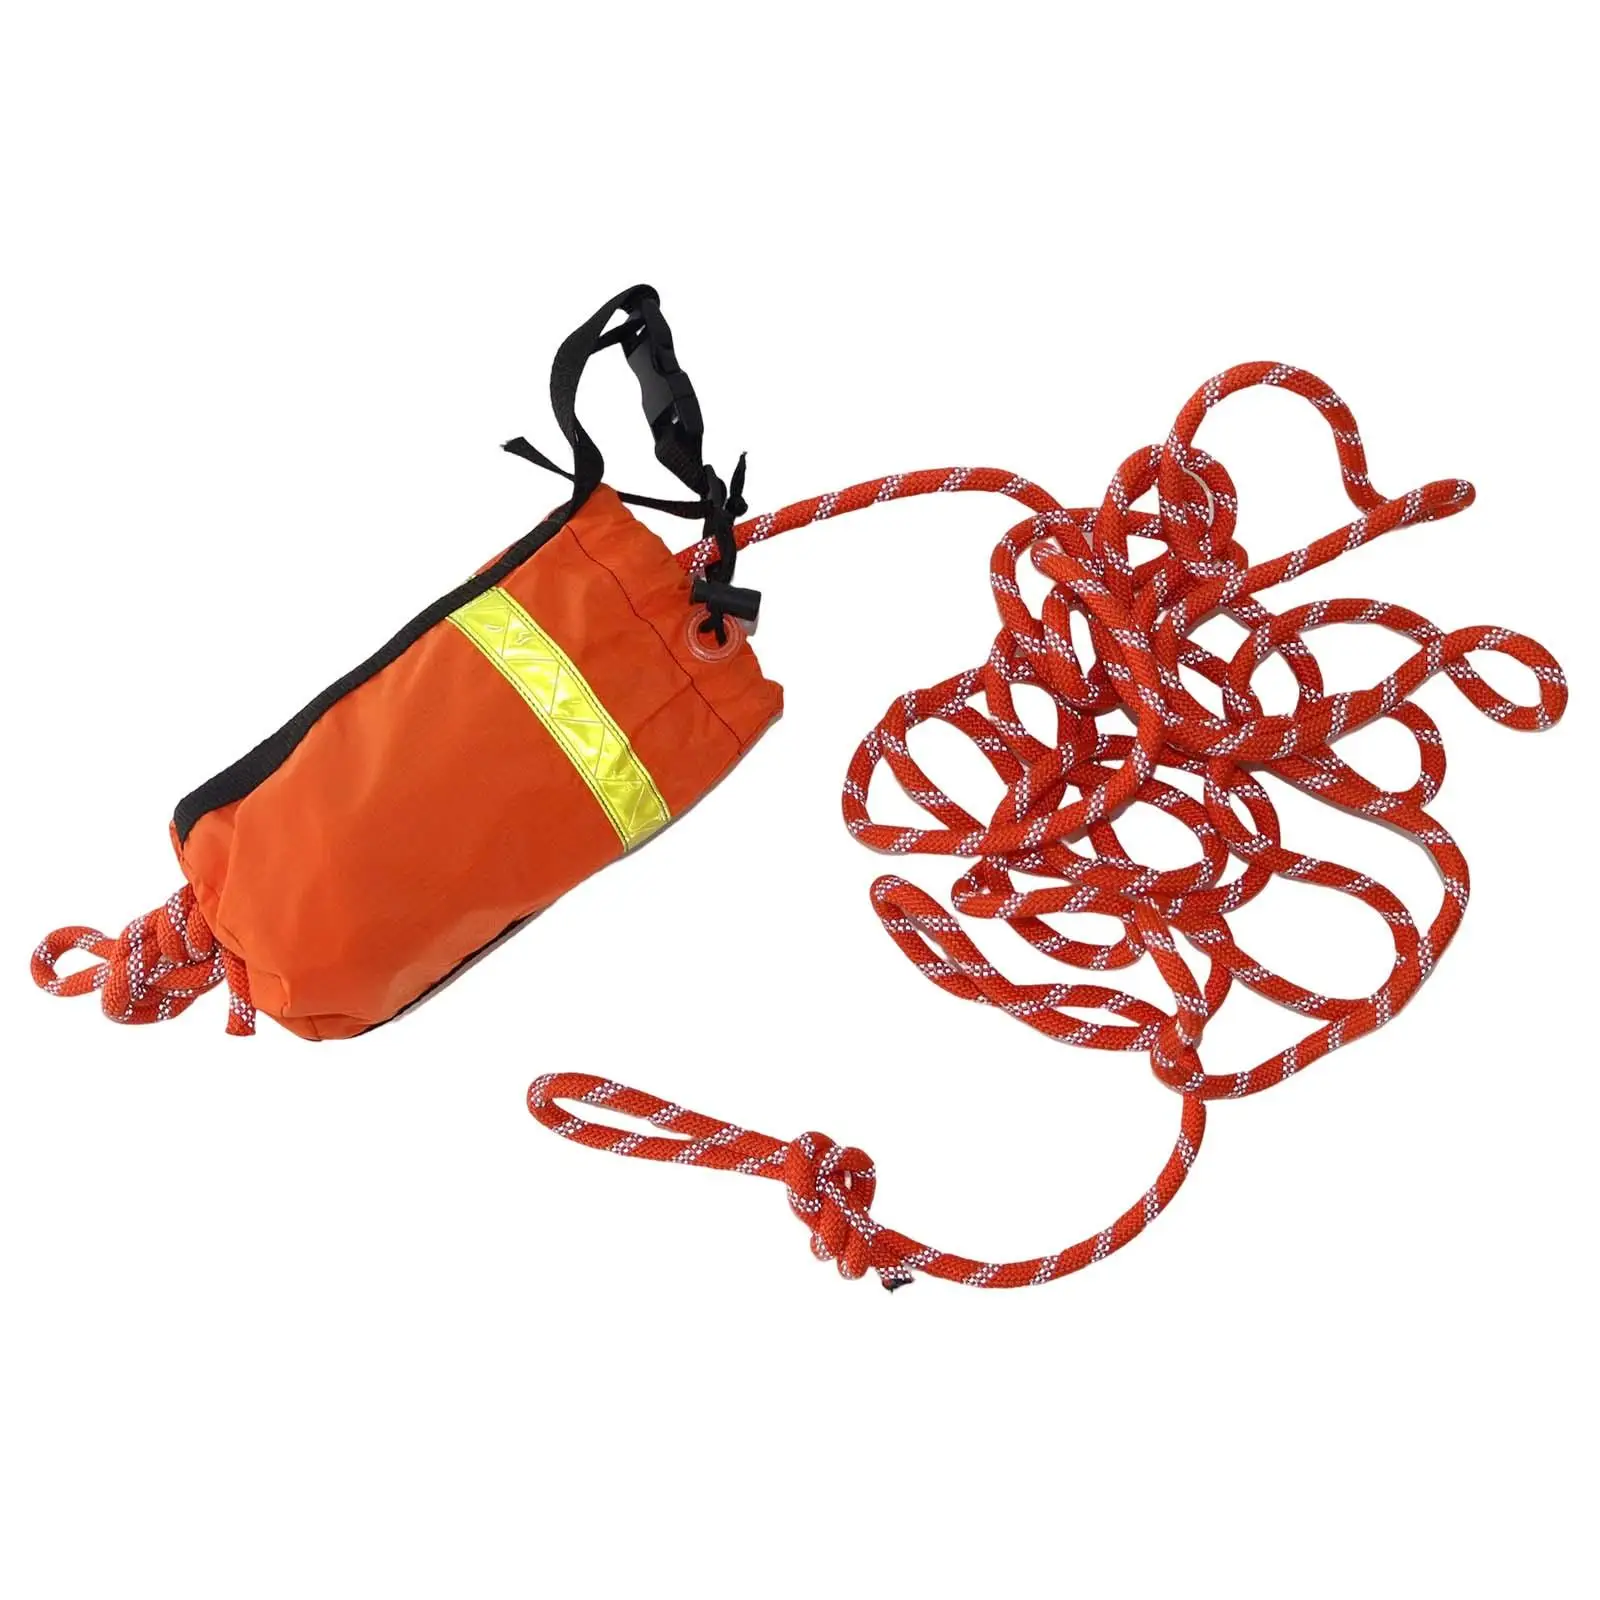 Water Floating Rope High Visibility Equipment for Boating Rafting Kayaking